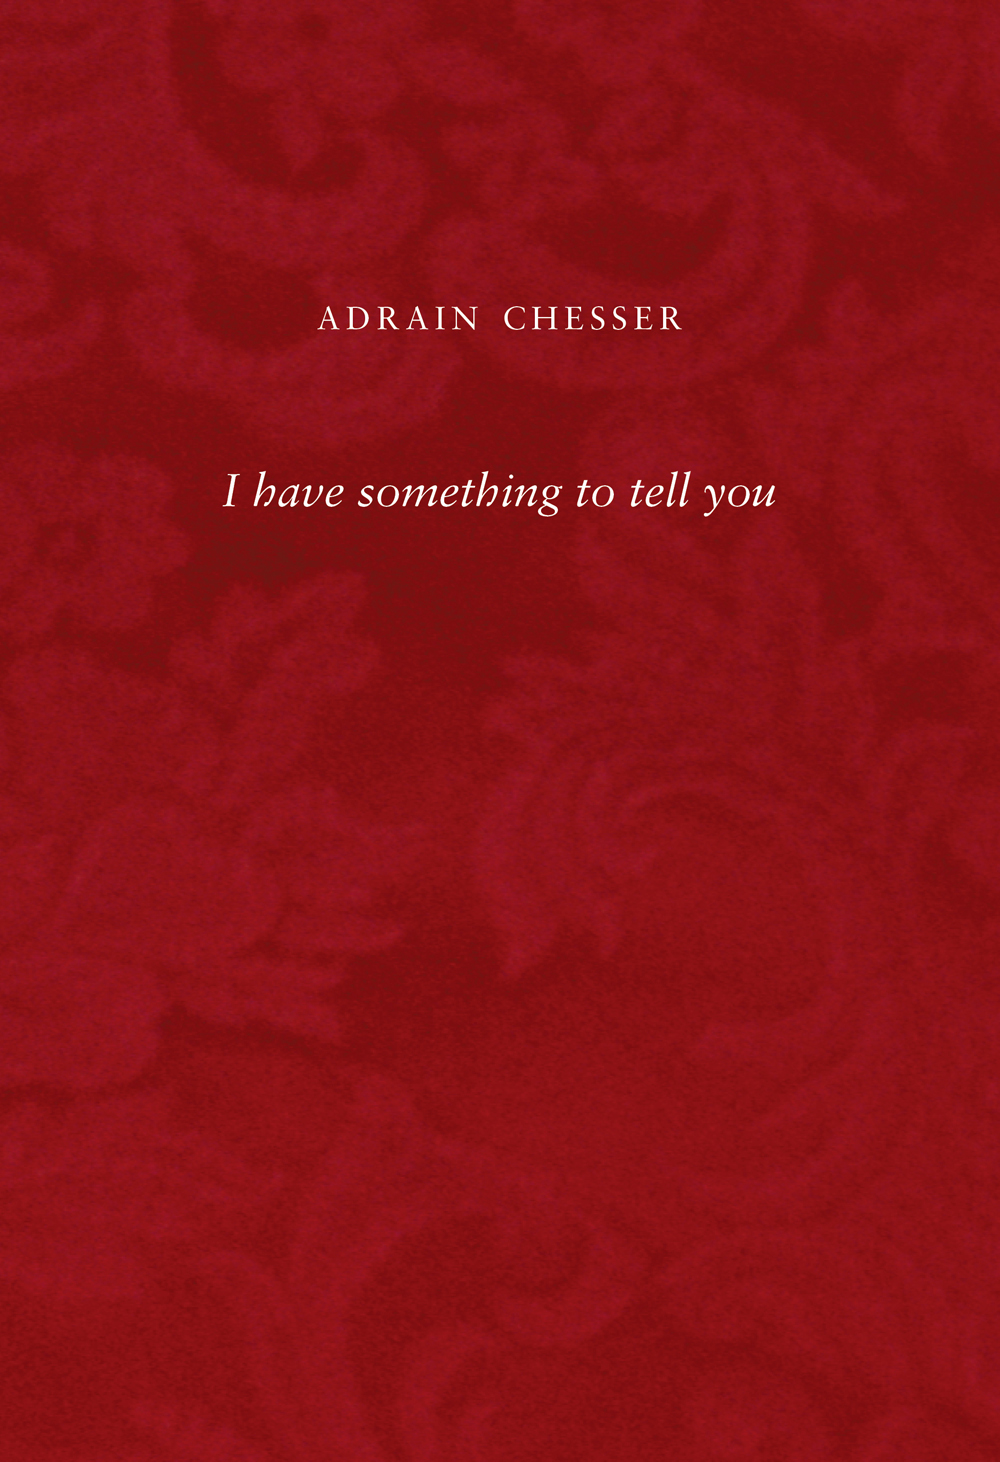 I Have Something To Tell You   Adrain Chesser